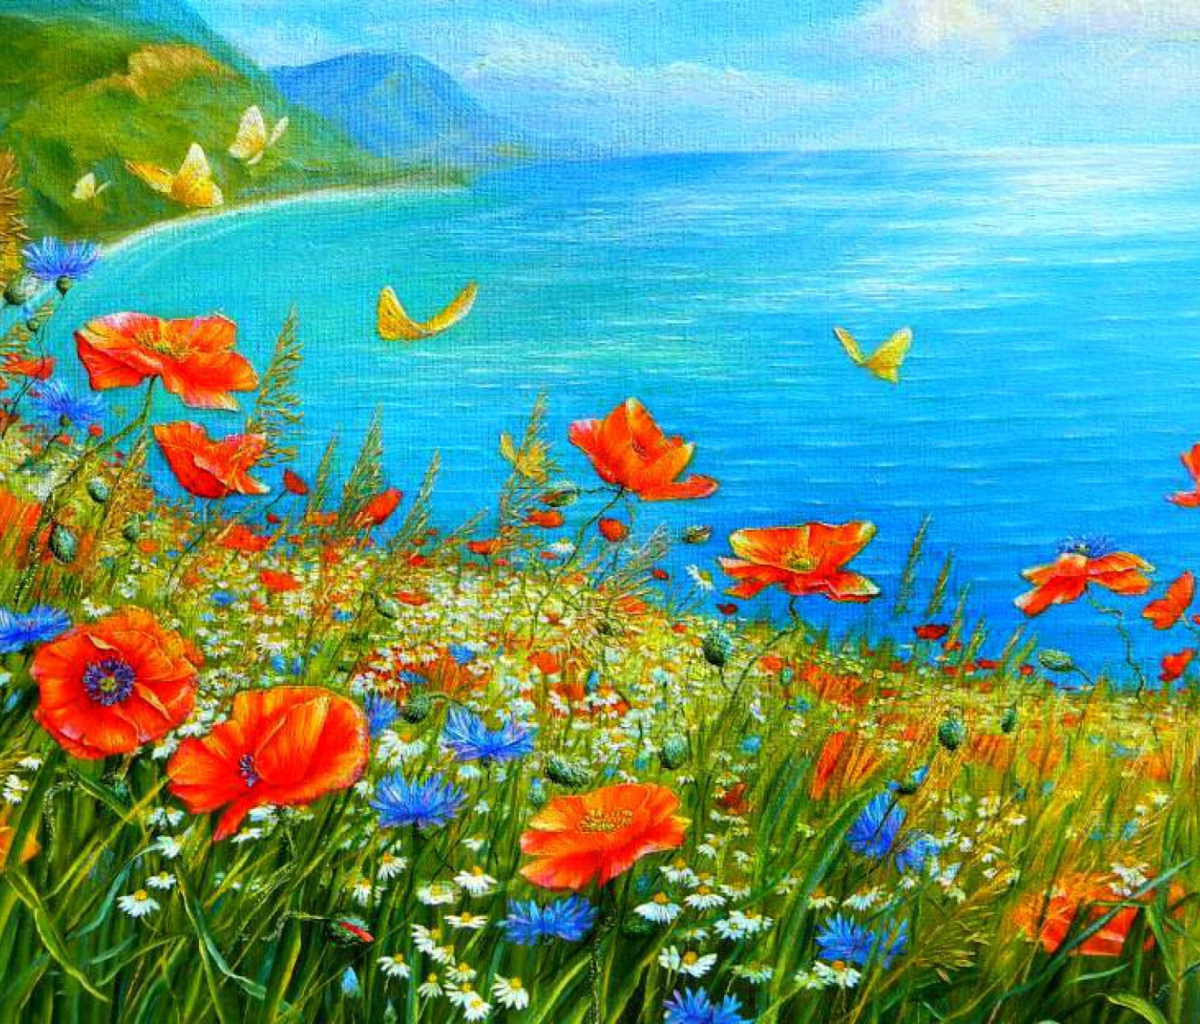 Das Summer Meadow By Sea Painting Wallpaper 1200x1024